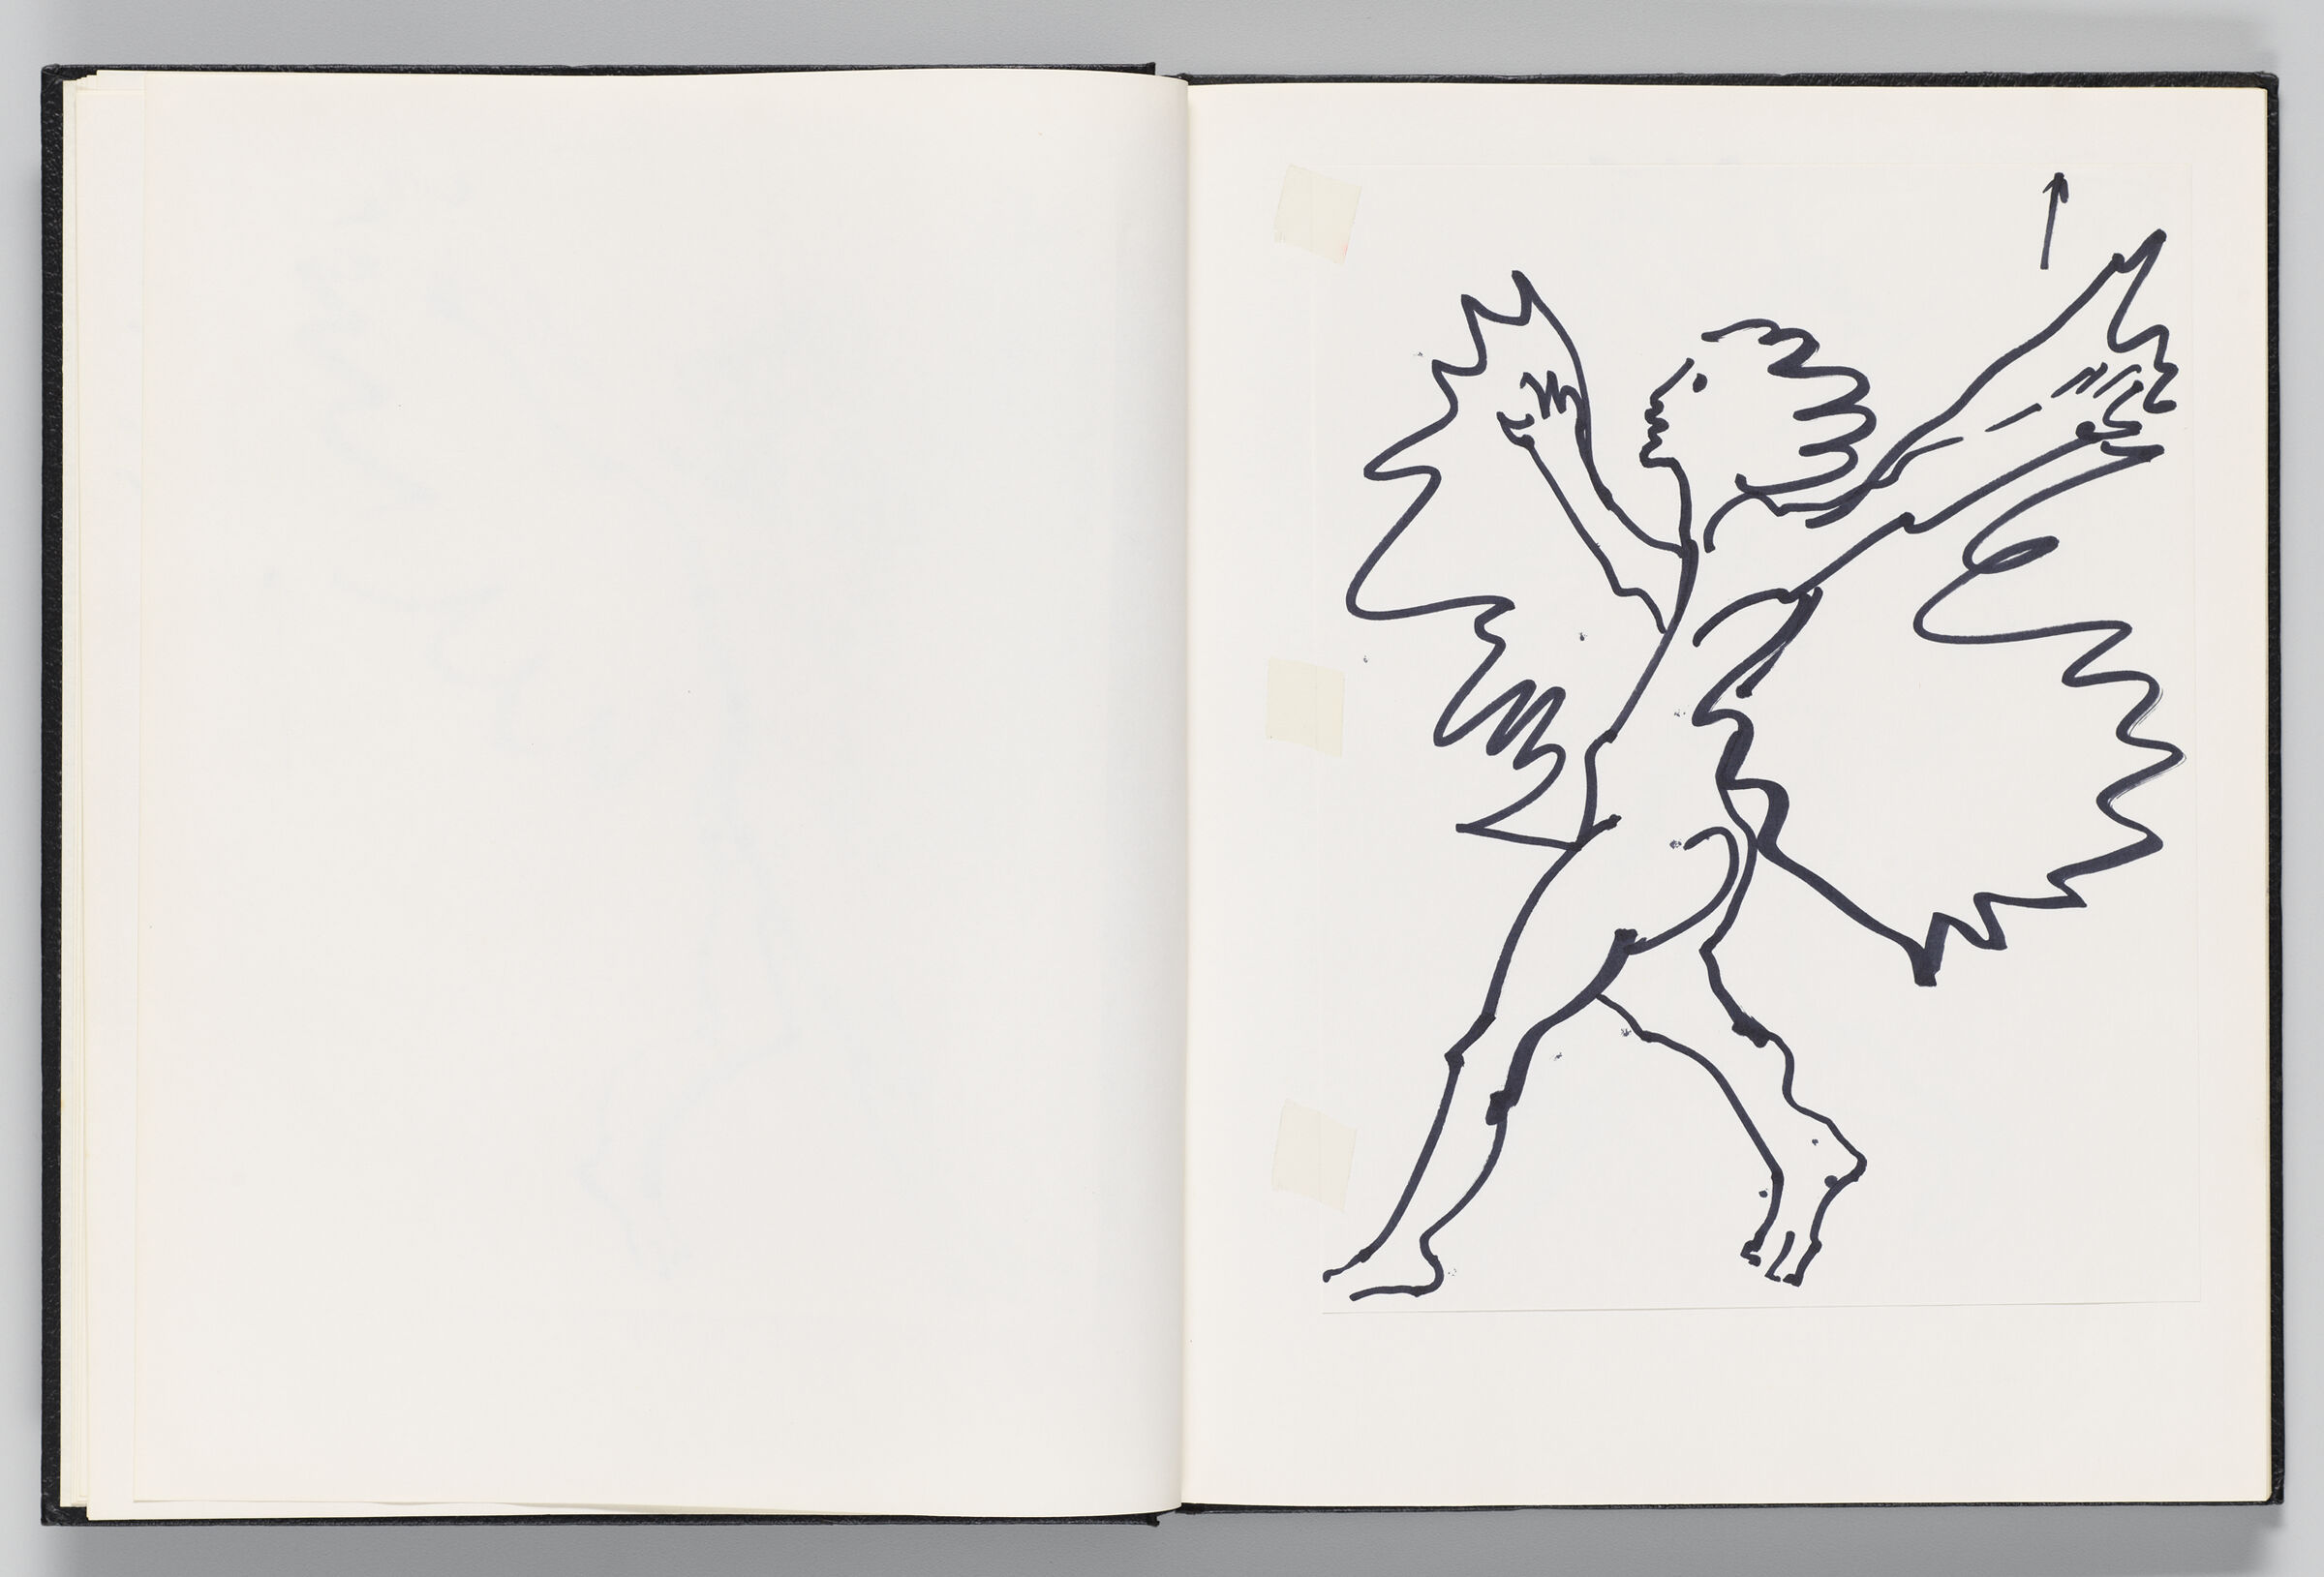 Untitled (Blank, Left Page); Untitled (Adhered Icarus Sketch, Right Page)